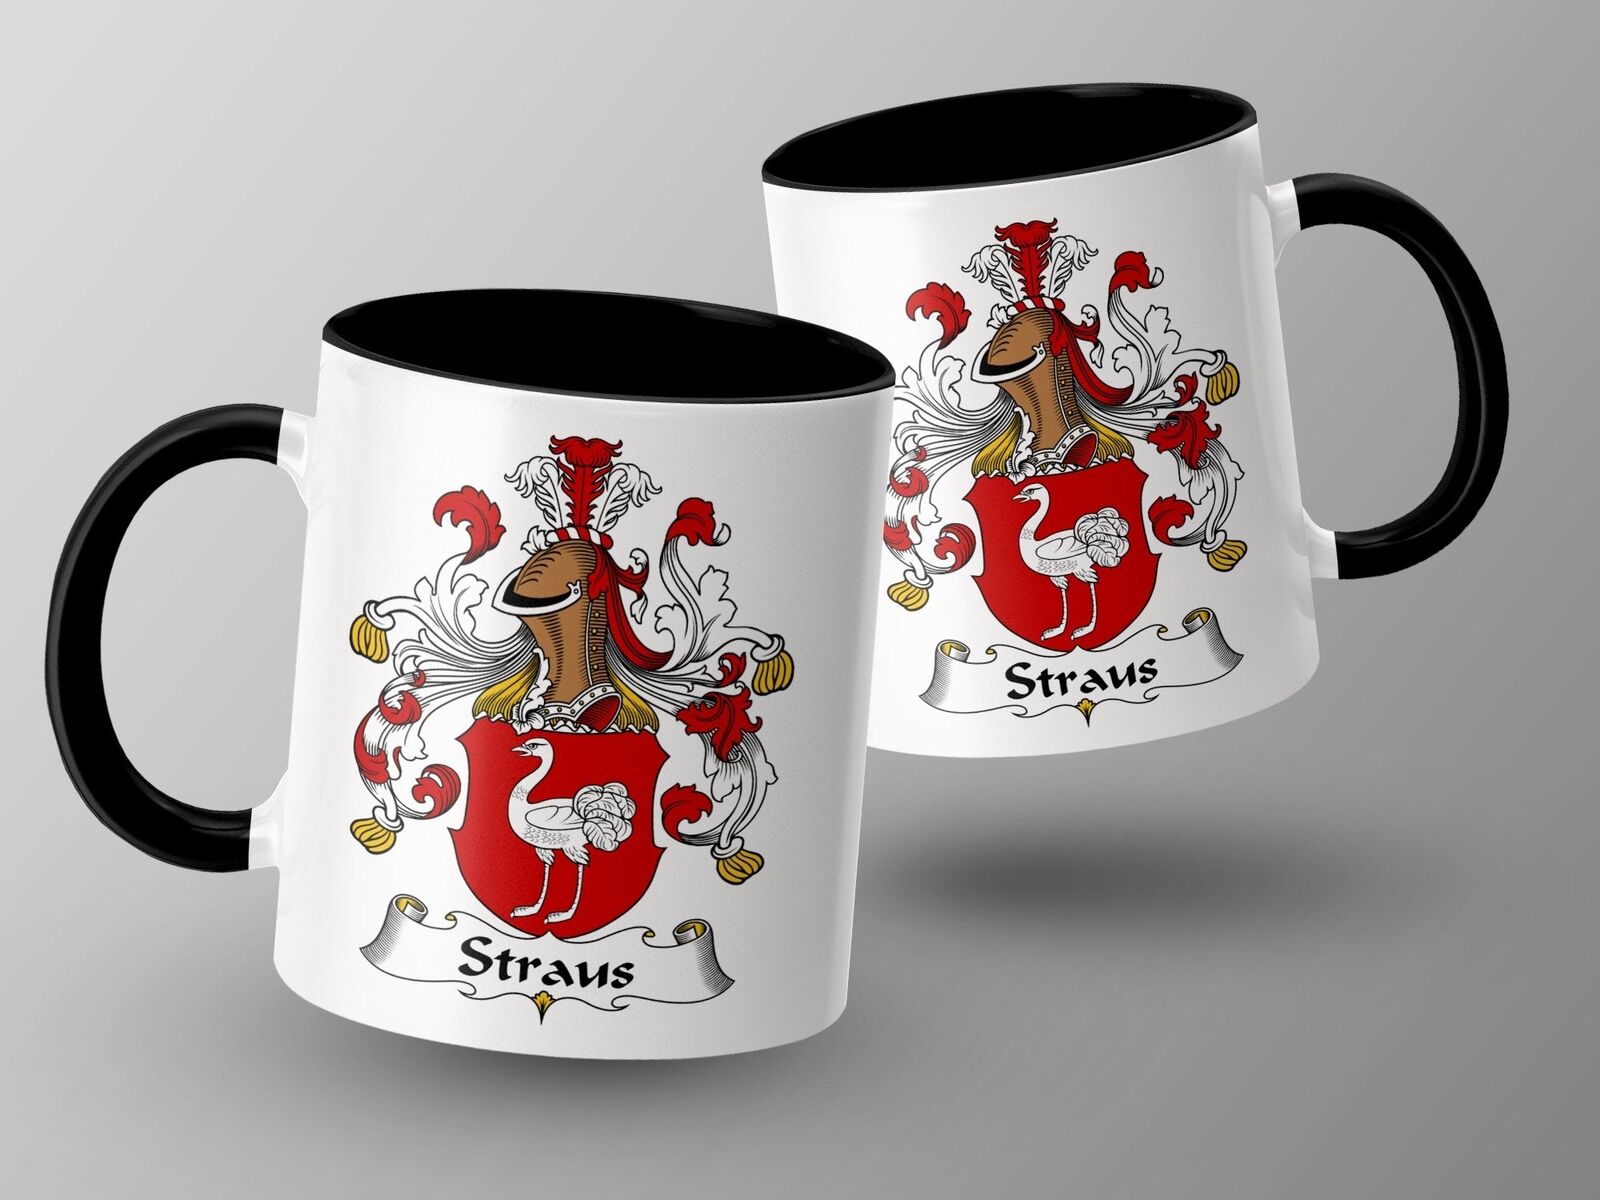 German Straus Family Crest Mug, Heraldic Red and White Coat of Arms